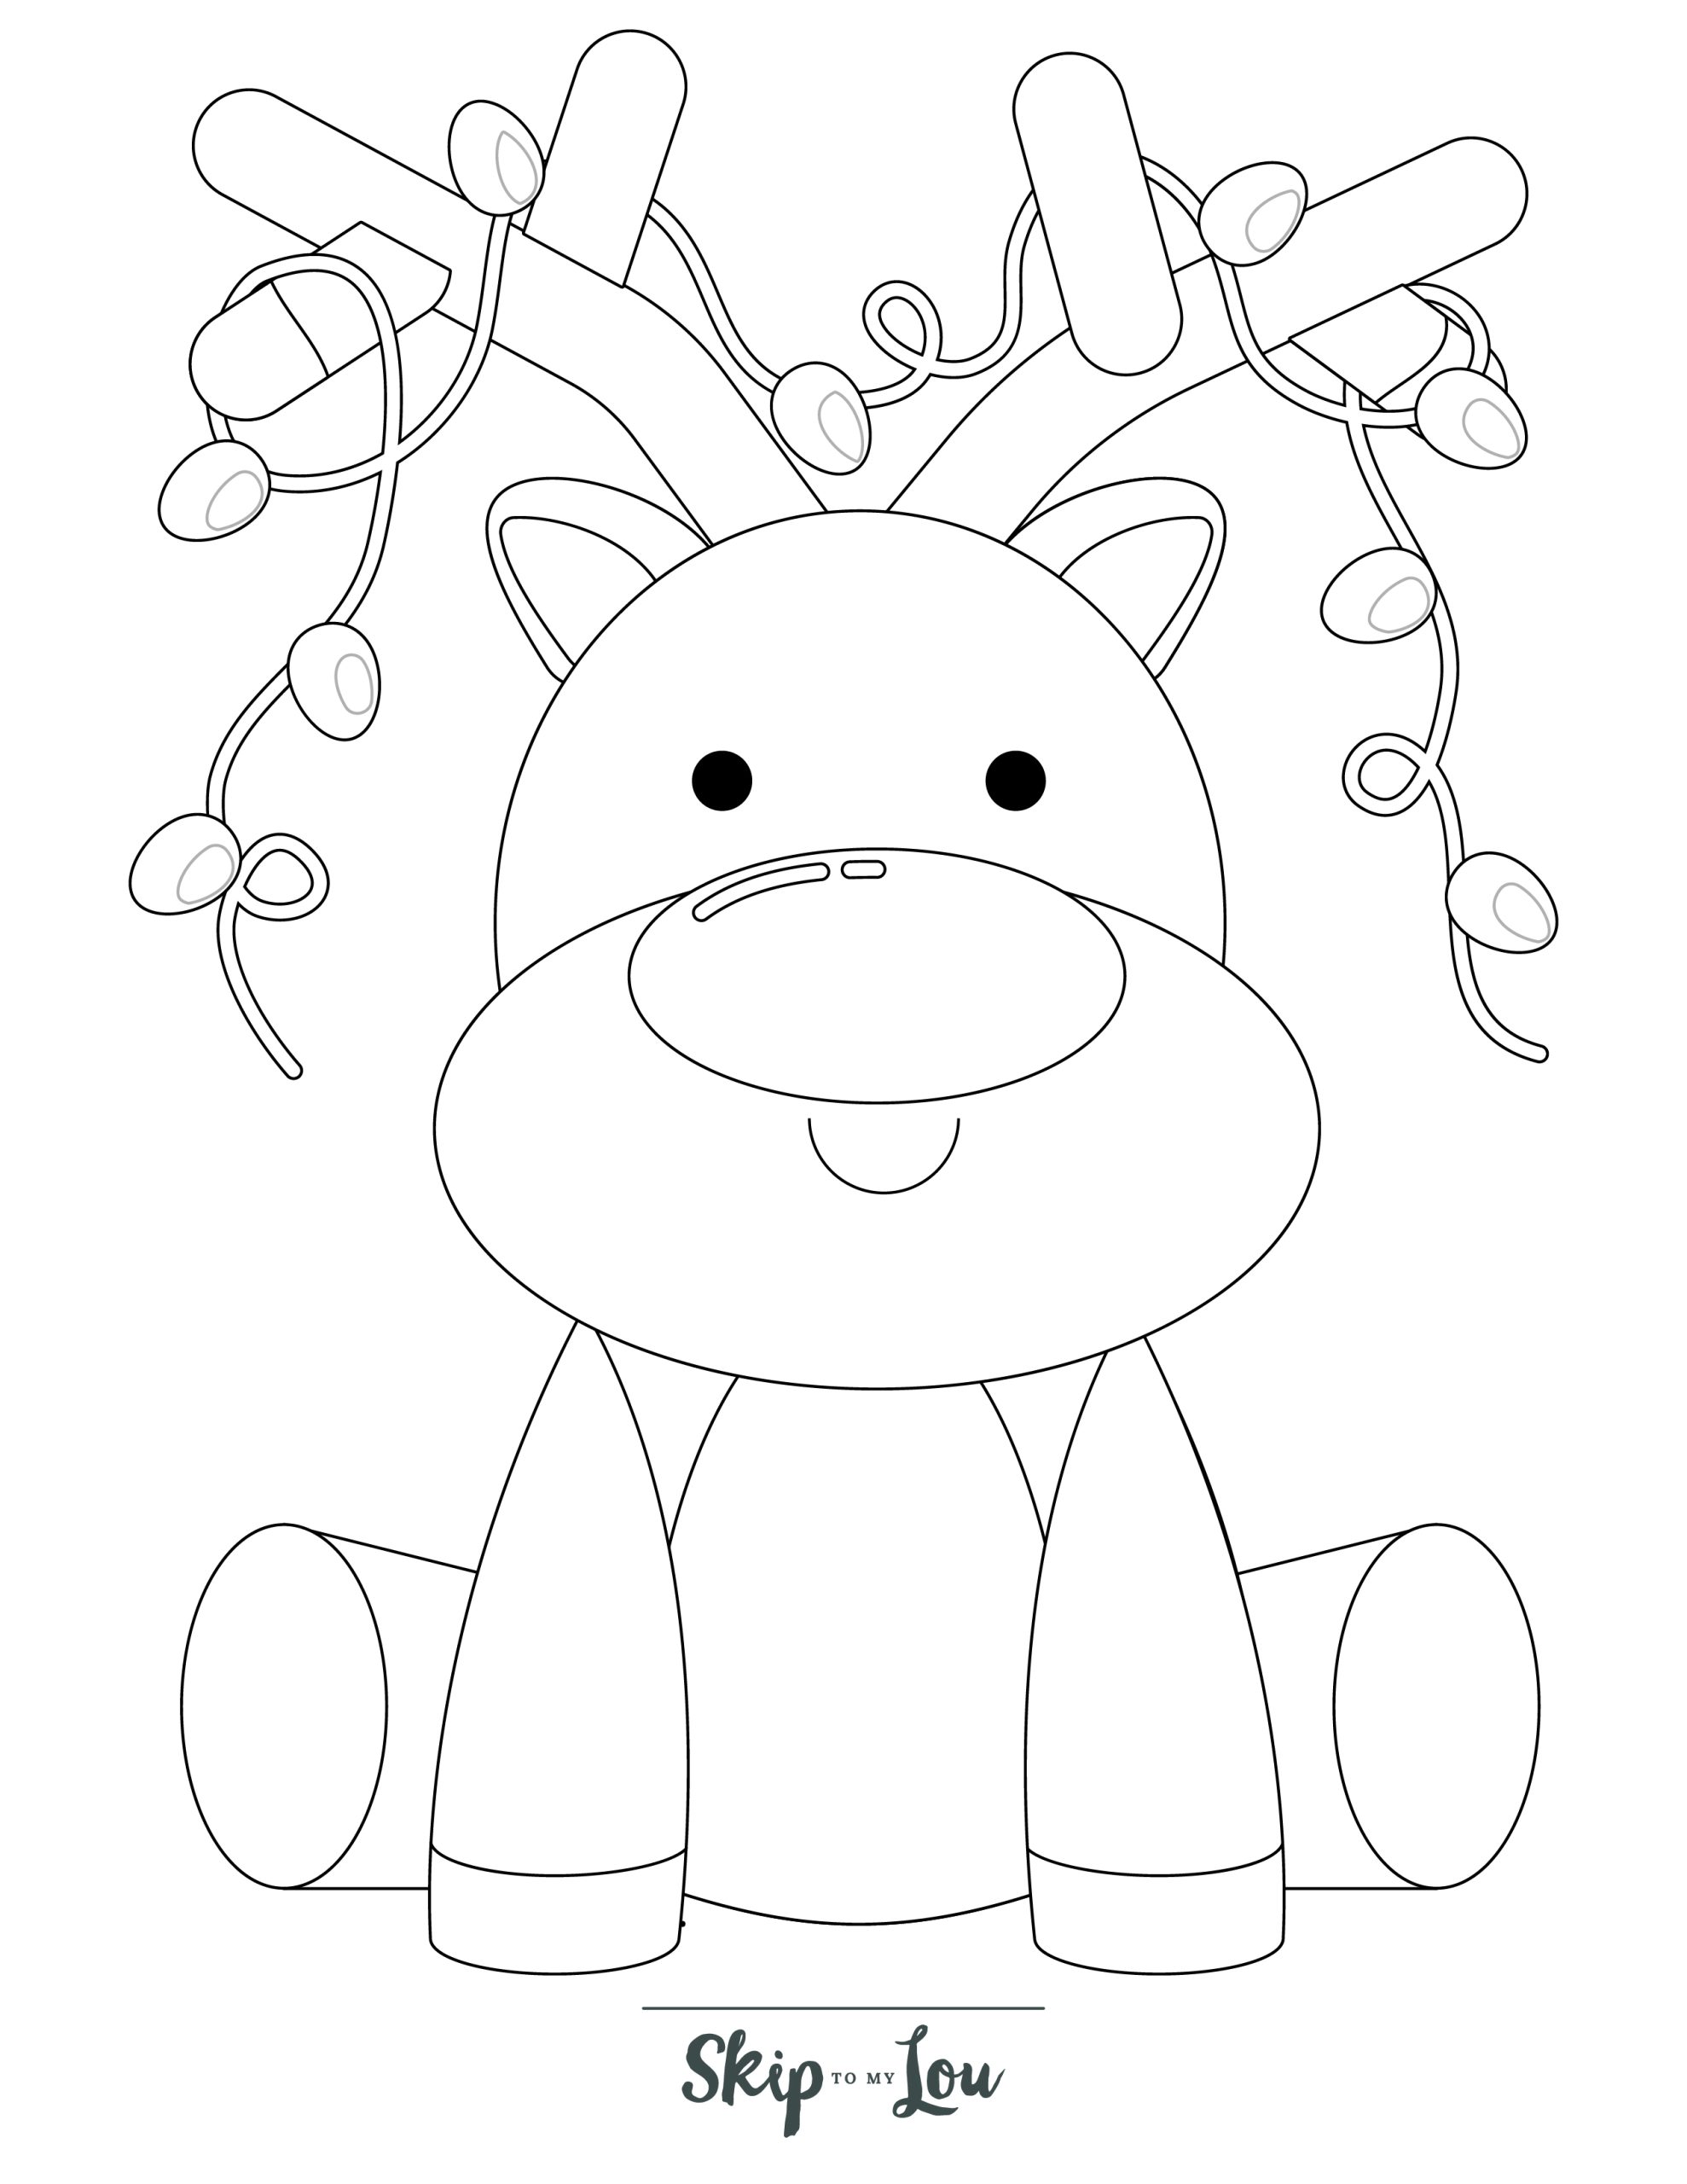 Reindeer Coloring Page 5 - Line drawing of a reindeer with light in its antlers